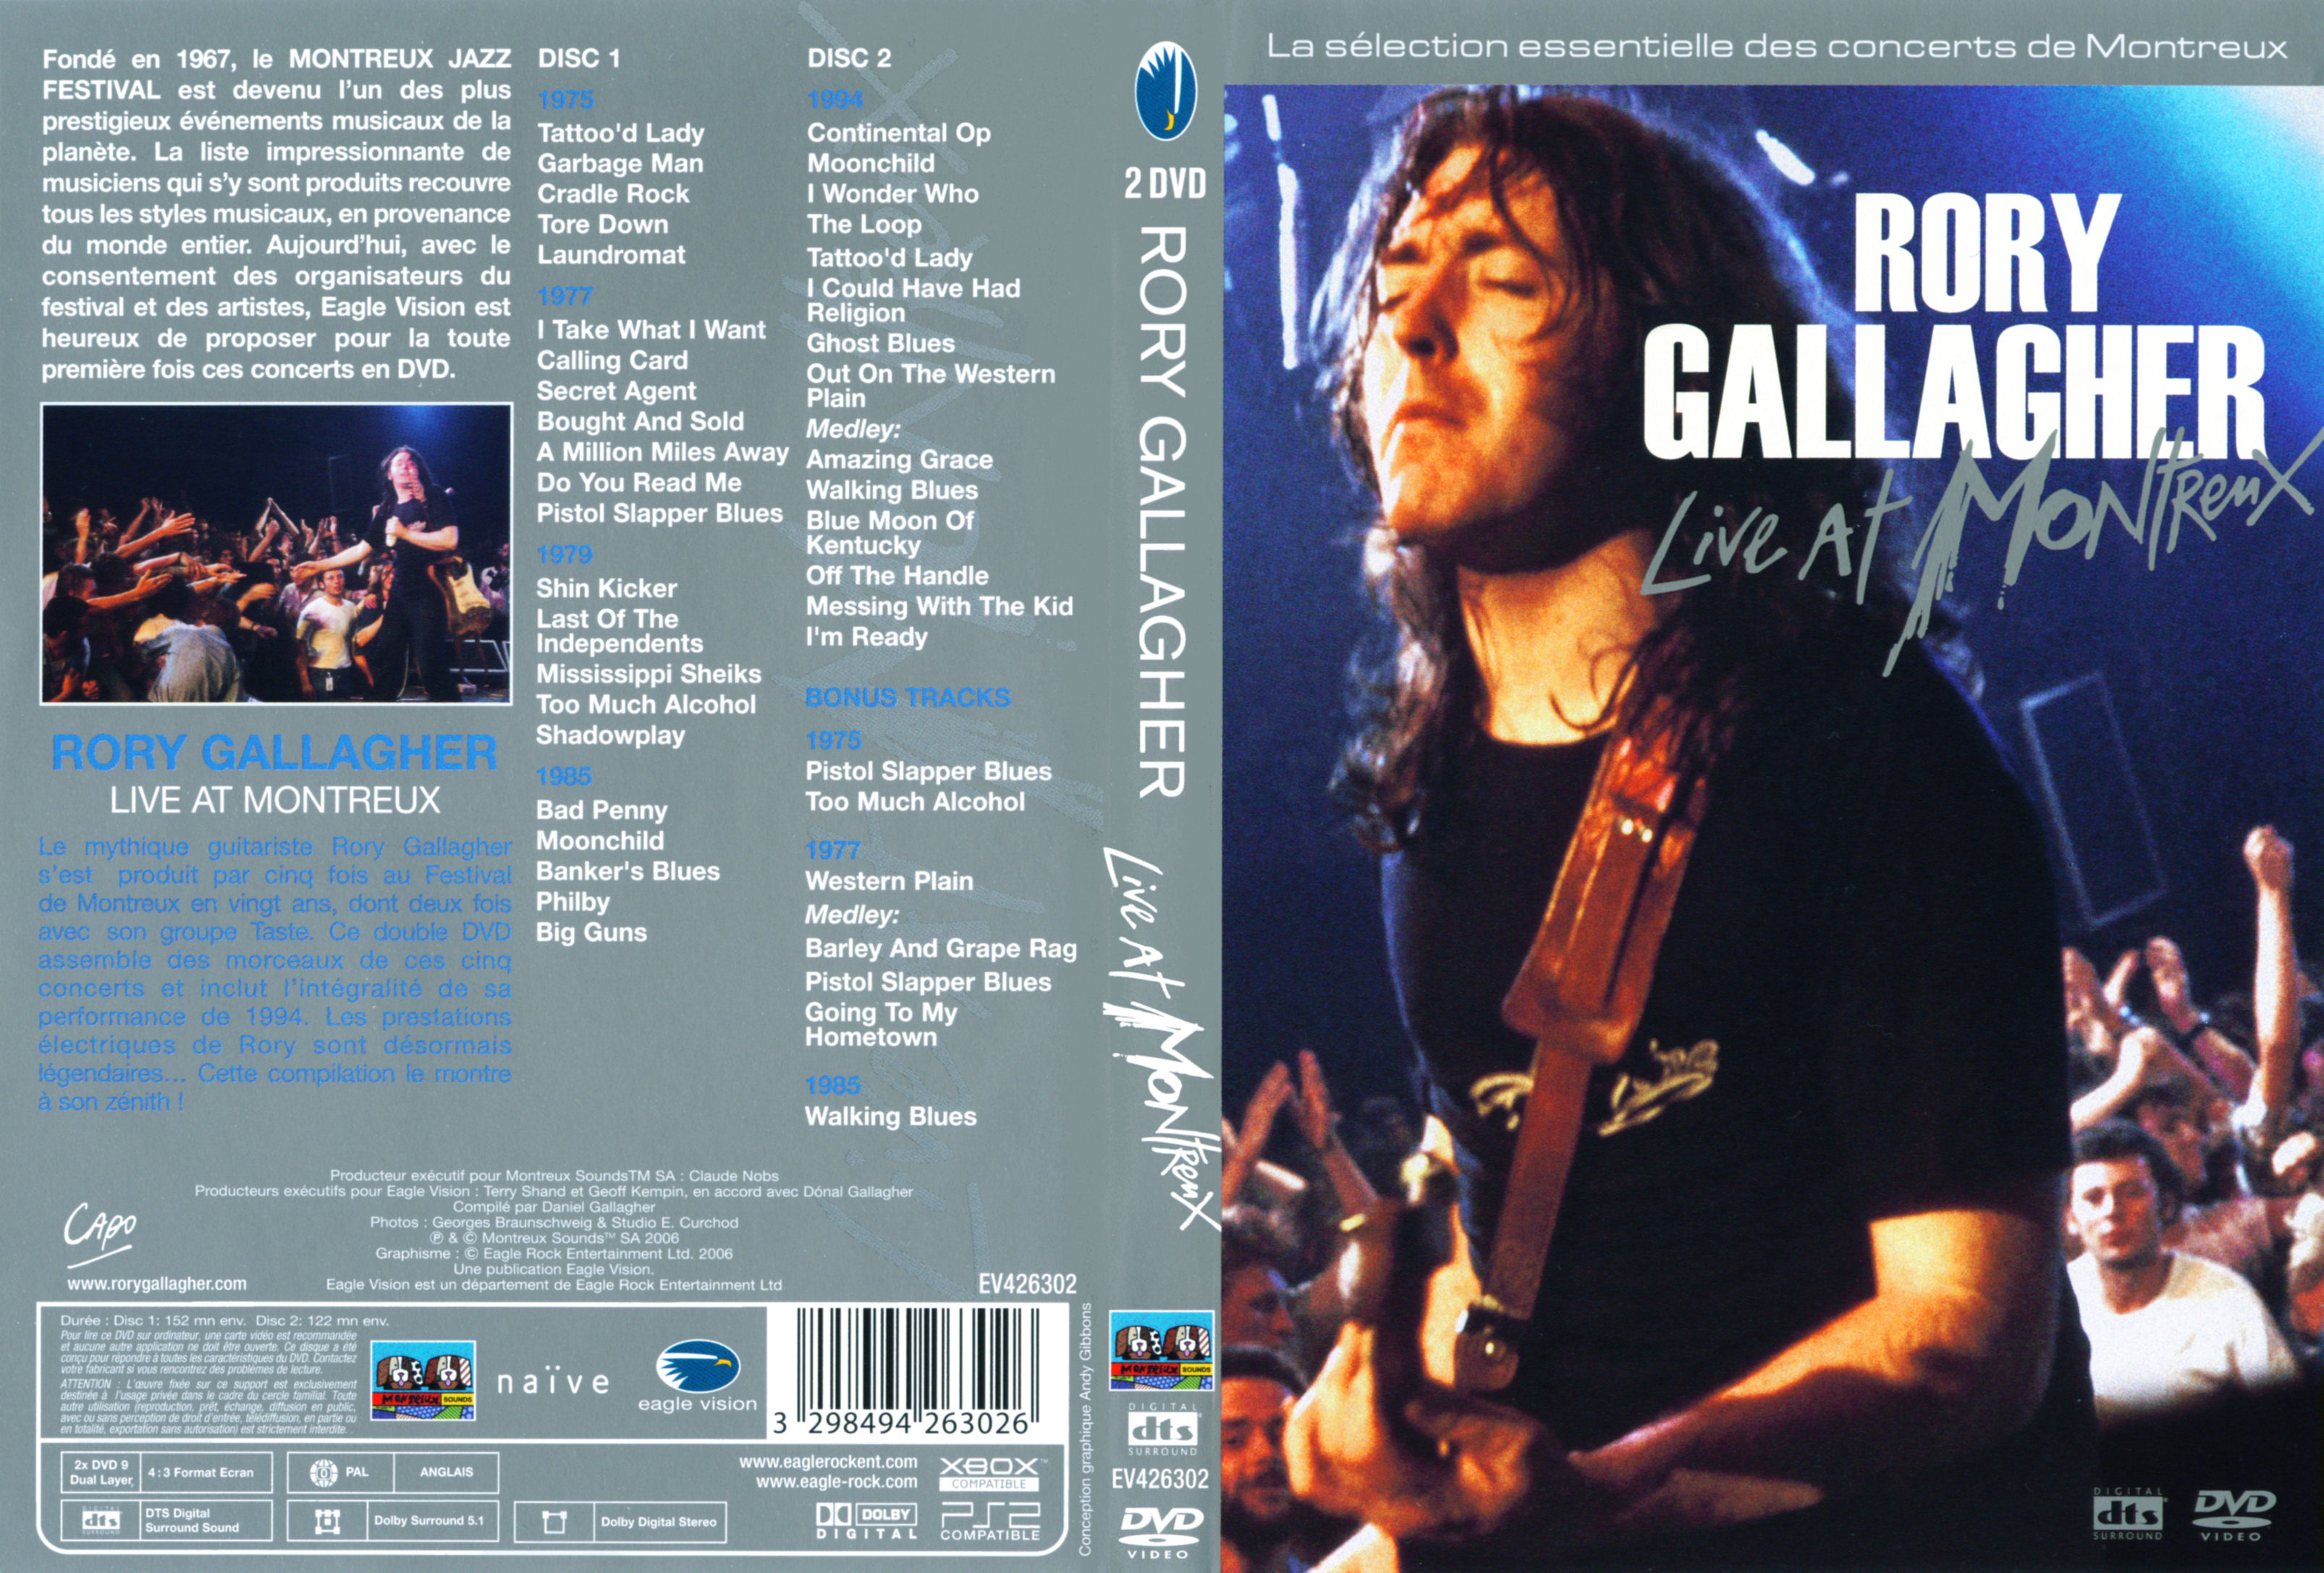 Jaquette DVD Rory Gallagher - Live at Montreux